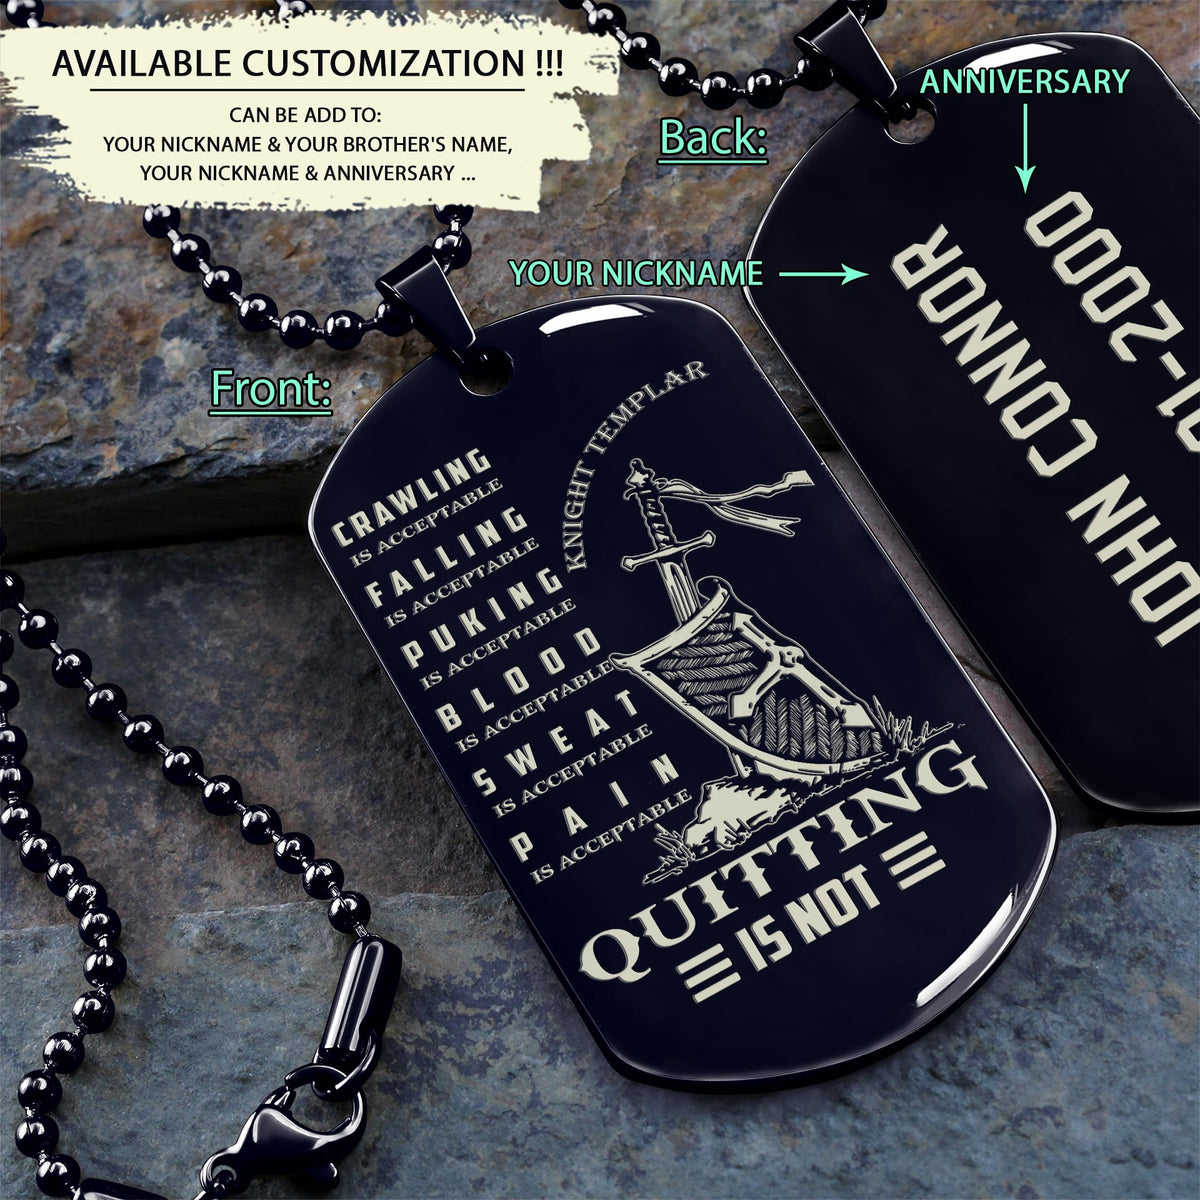 KTD018 - Quitting Is Not - Knight Templar  - Engrave Black Dogtag